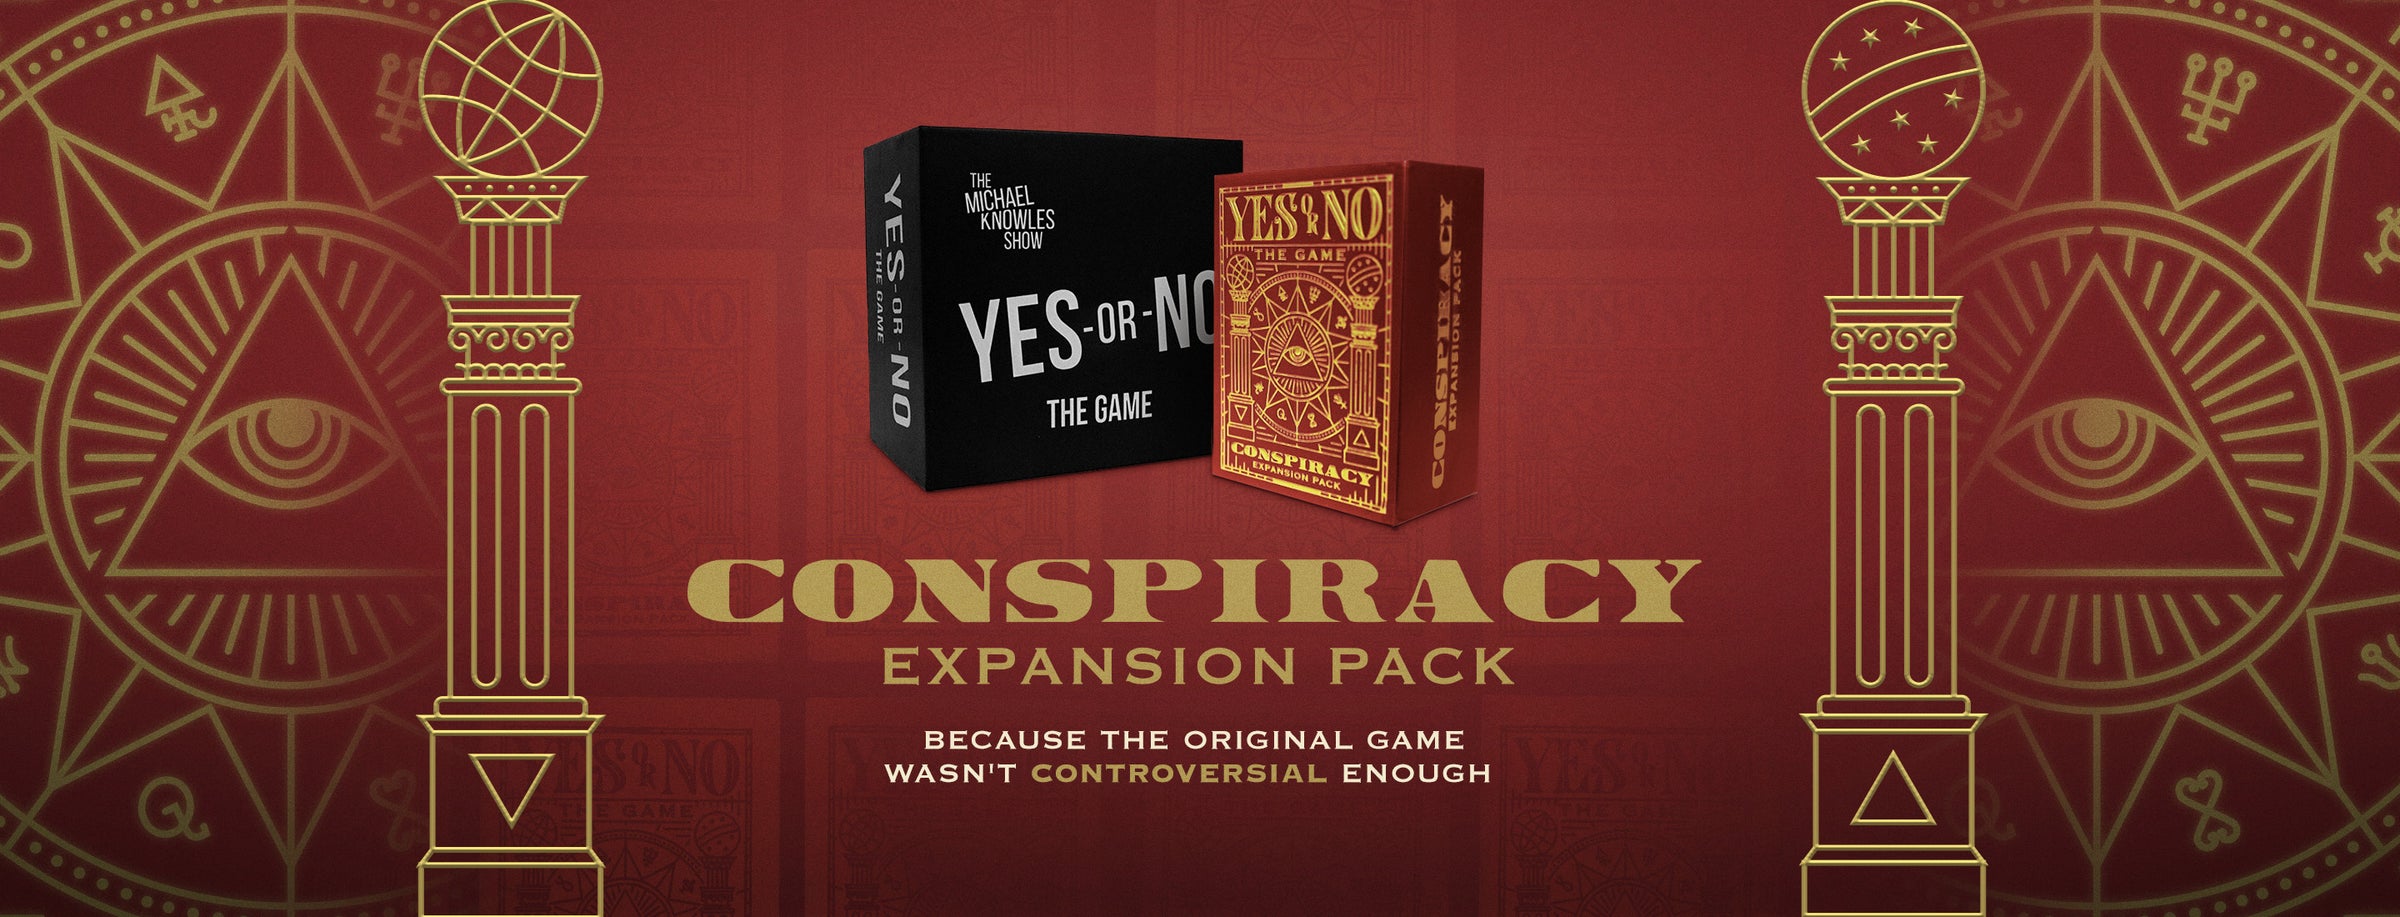 Yes or No Conspiracy Expansion Pack. Because the original game wasn't controversial enough.